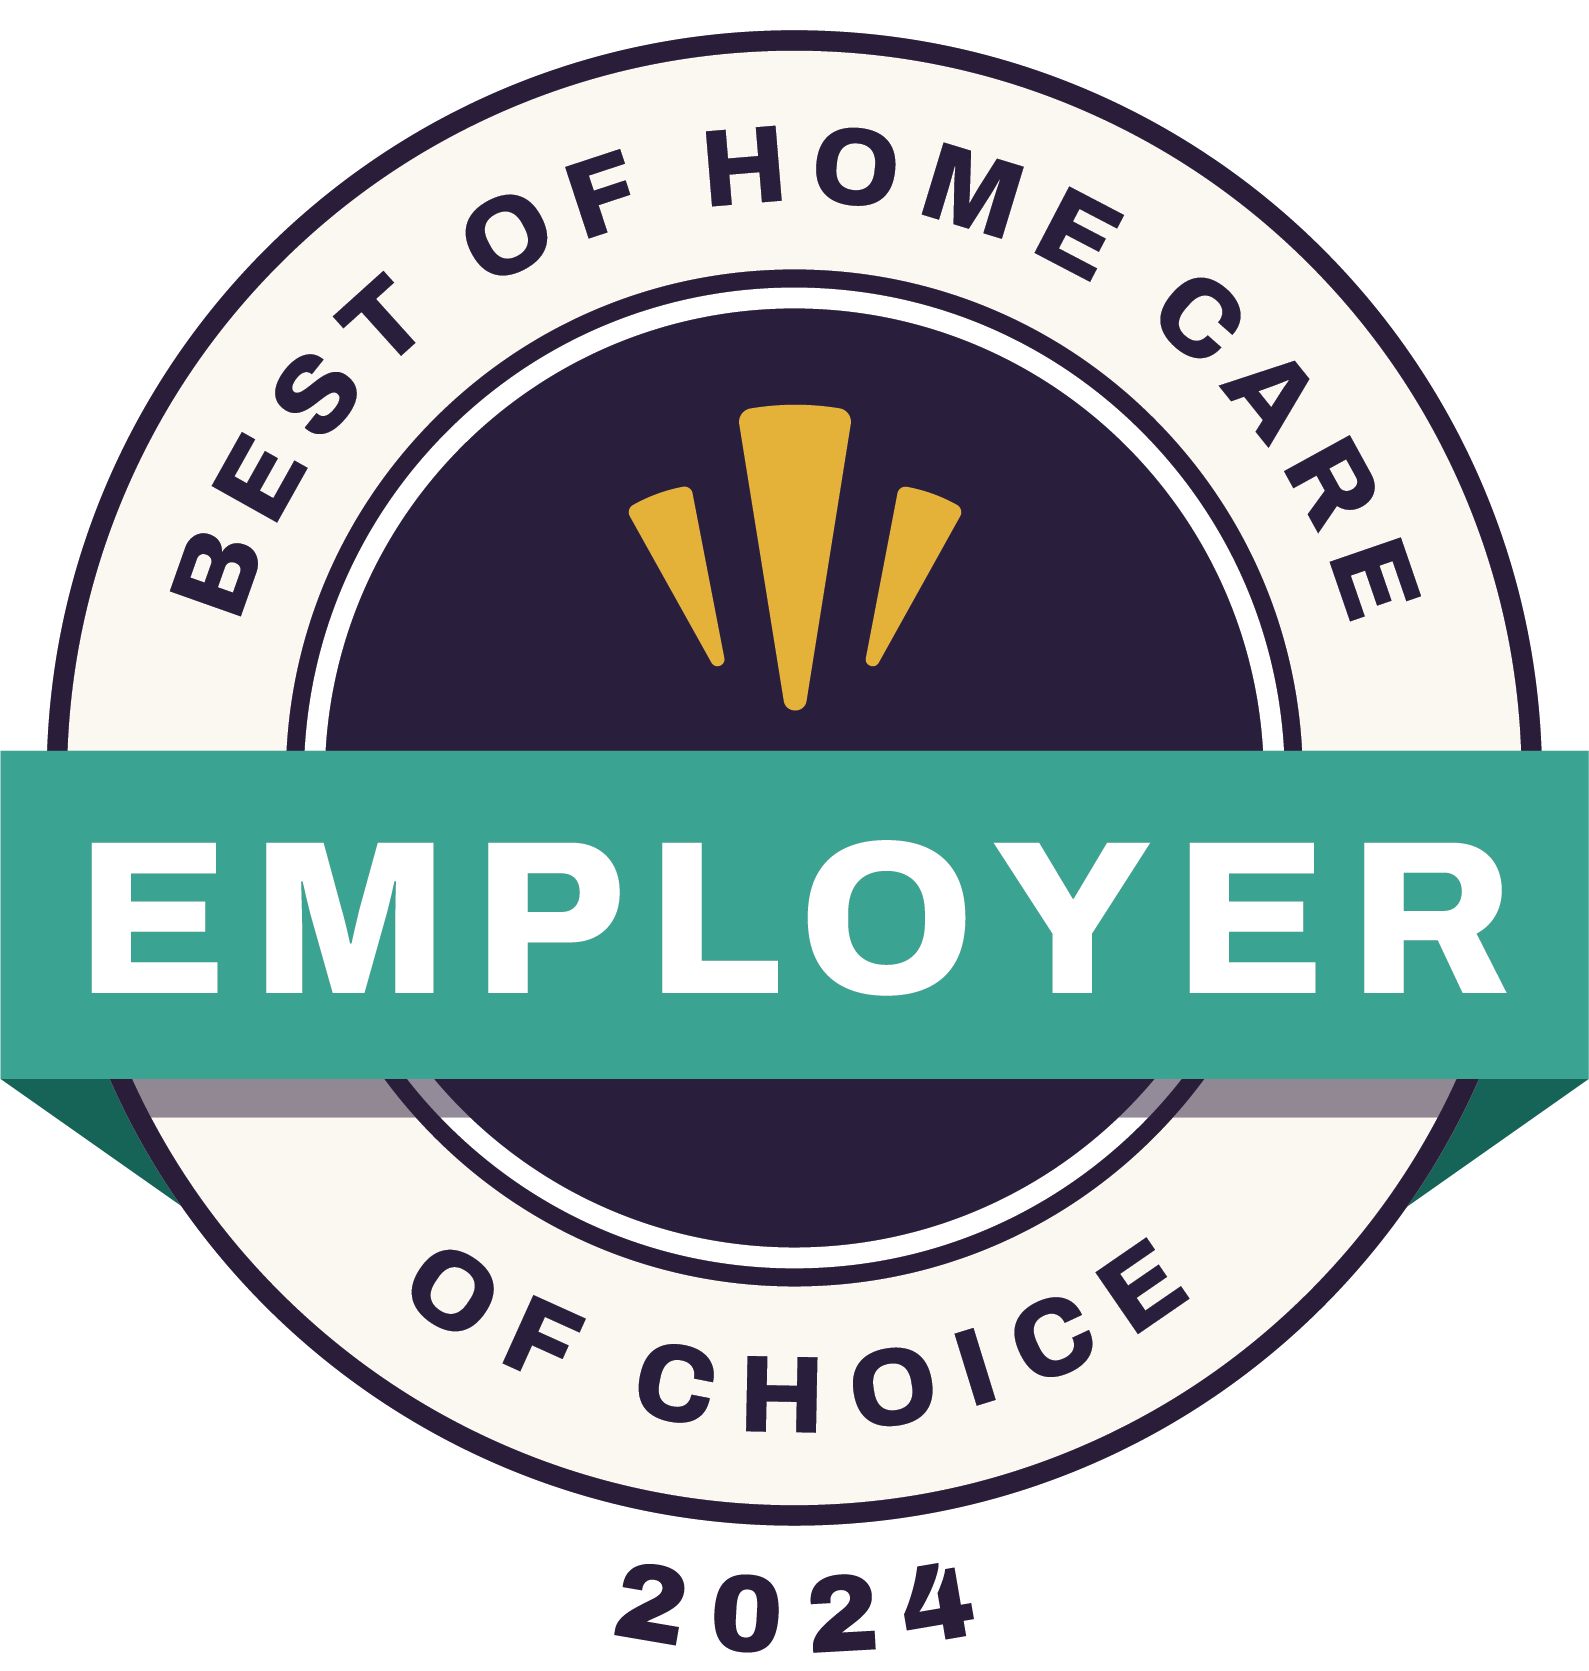 Best of home care employer of choice badge